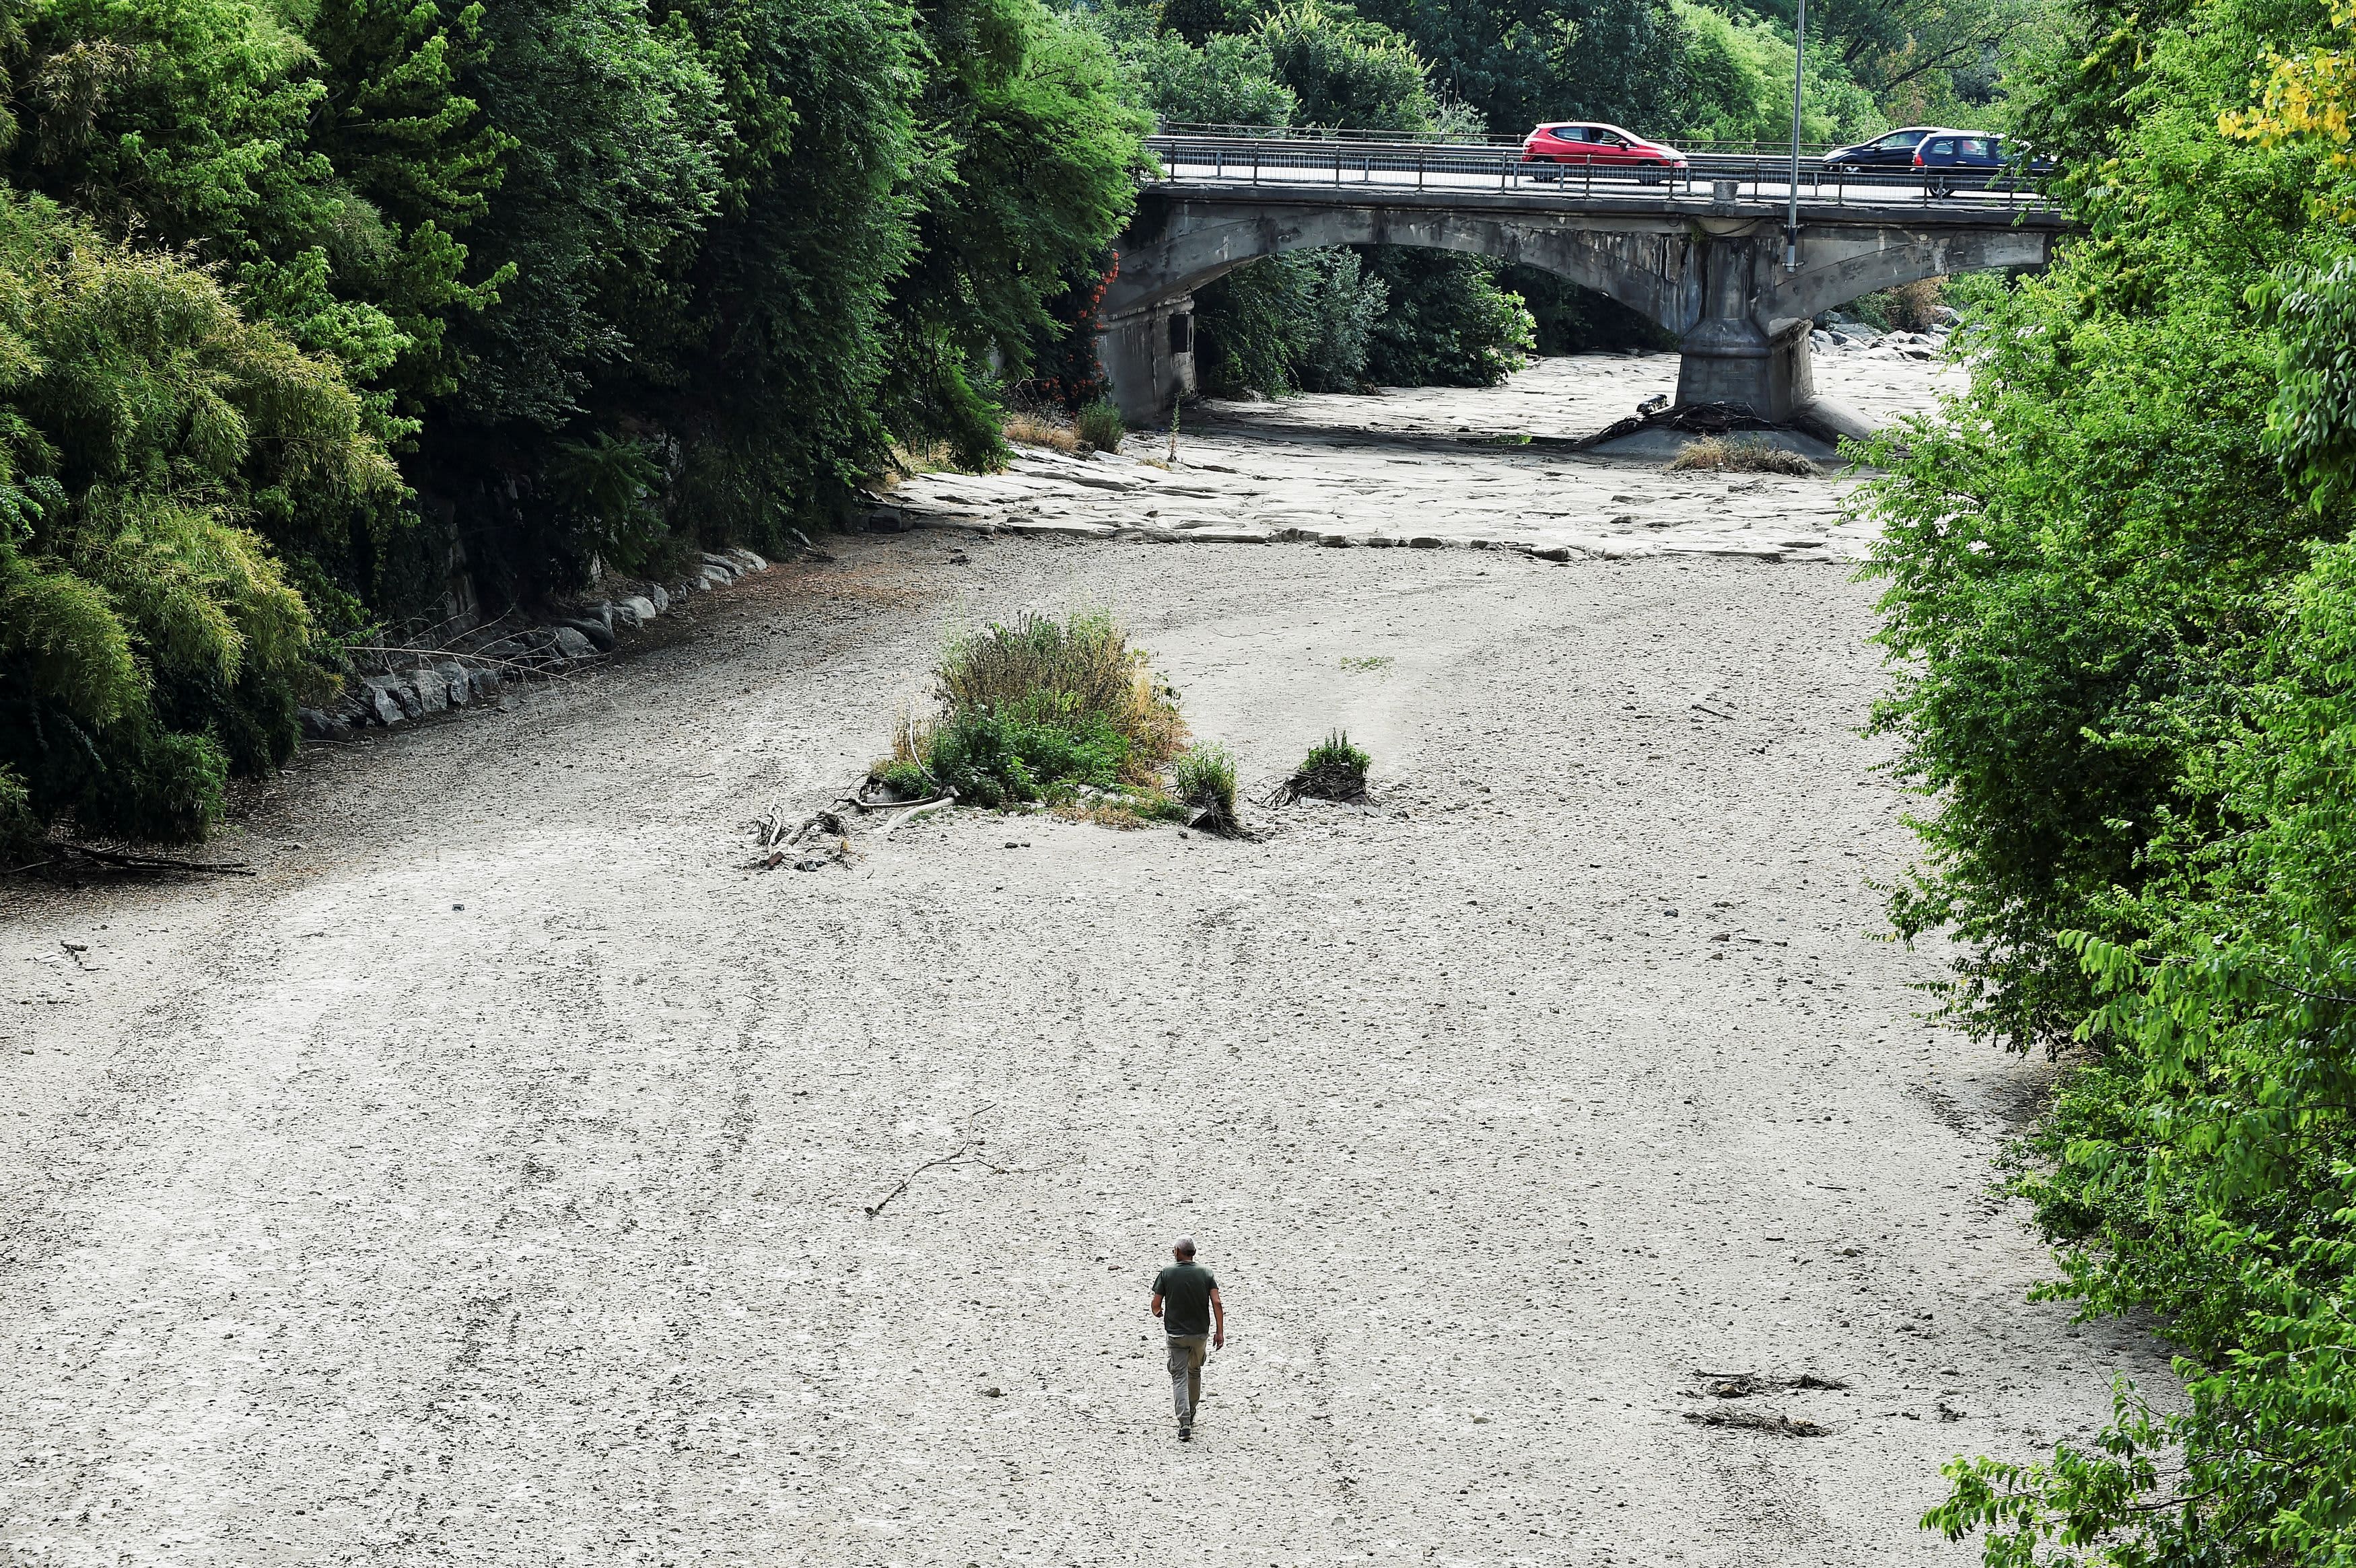 Italy declared a state of emergency because of drought in the Po River